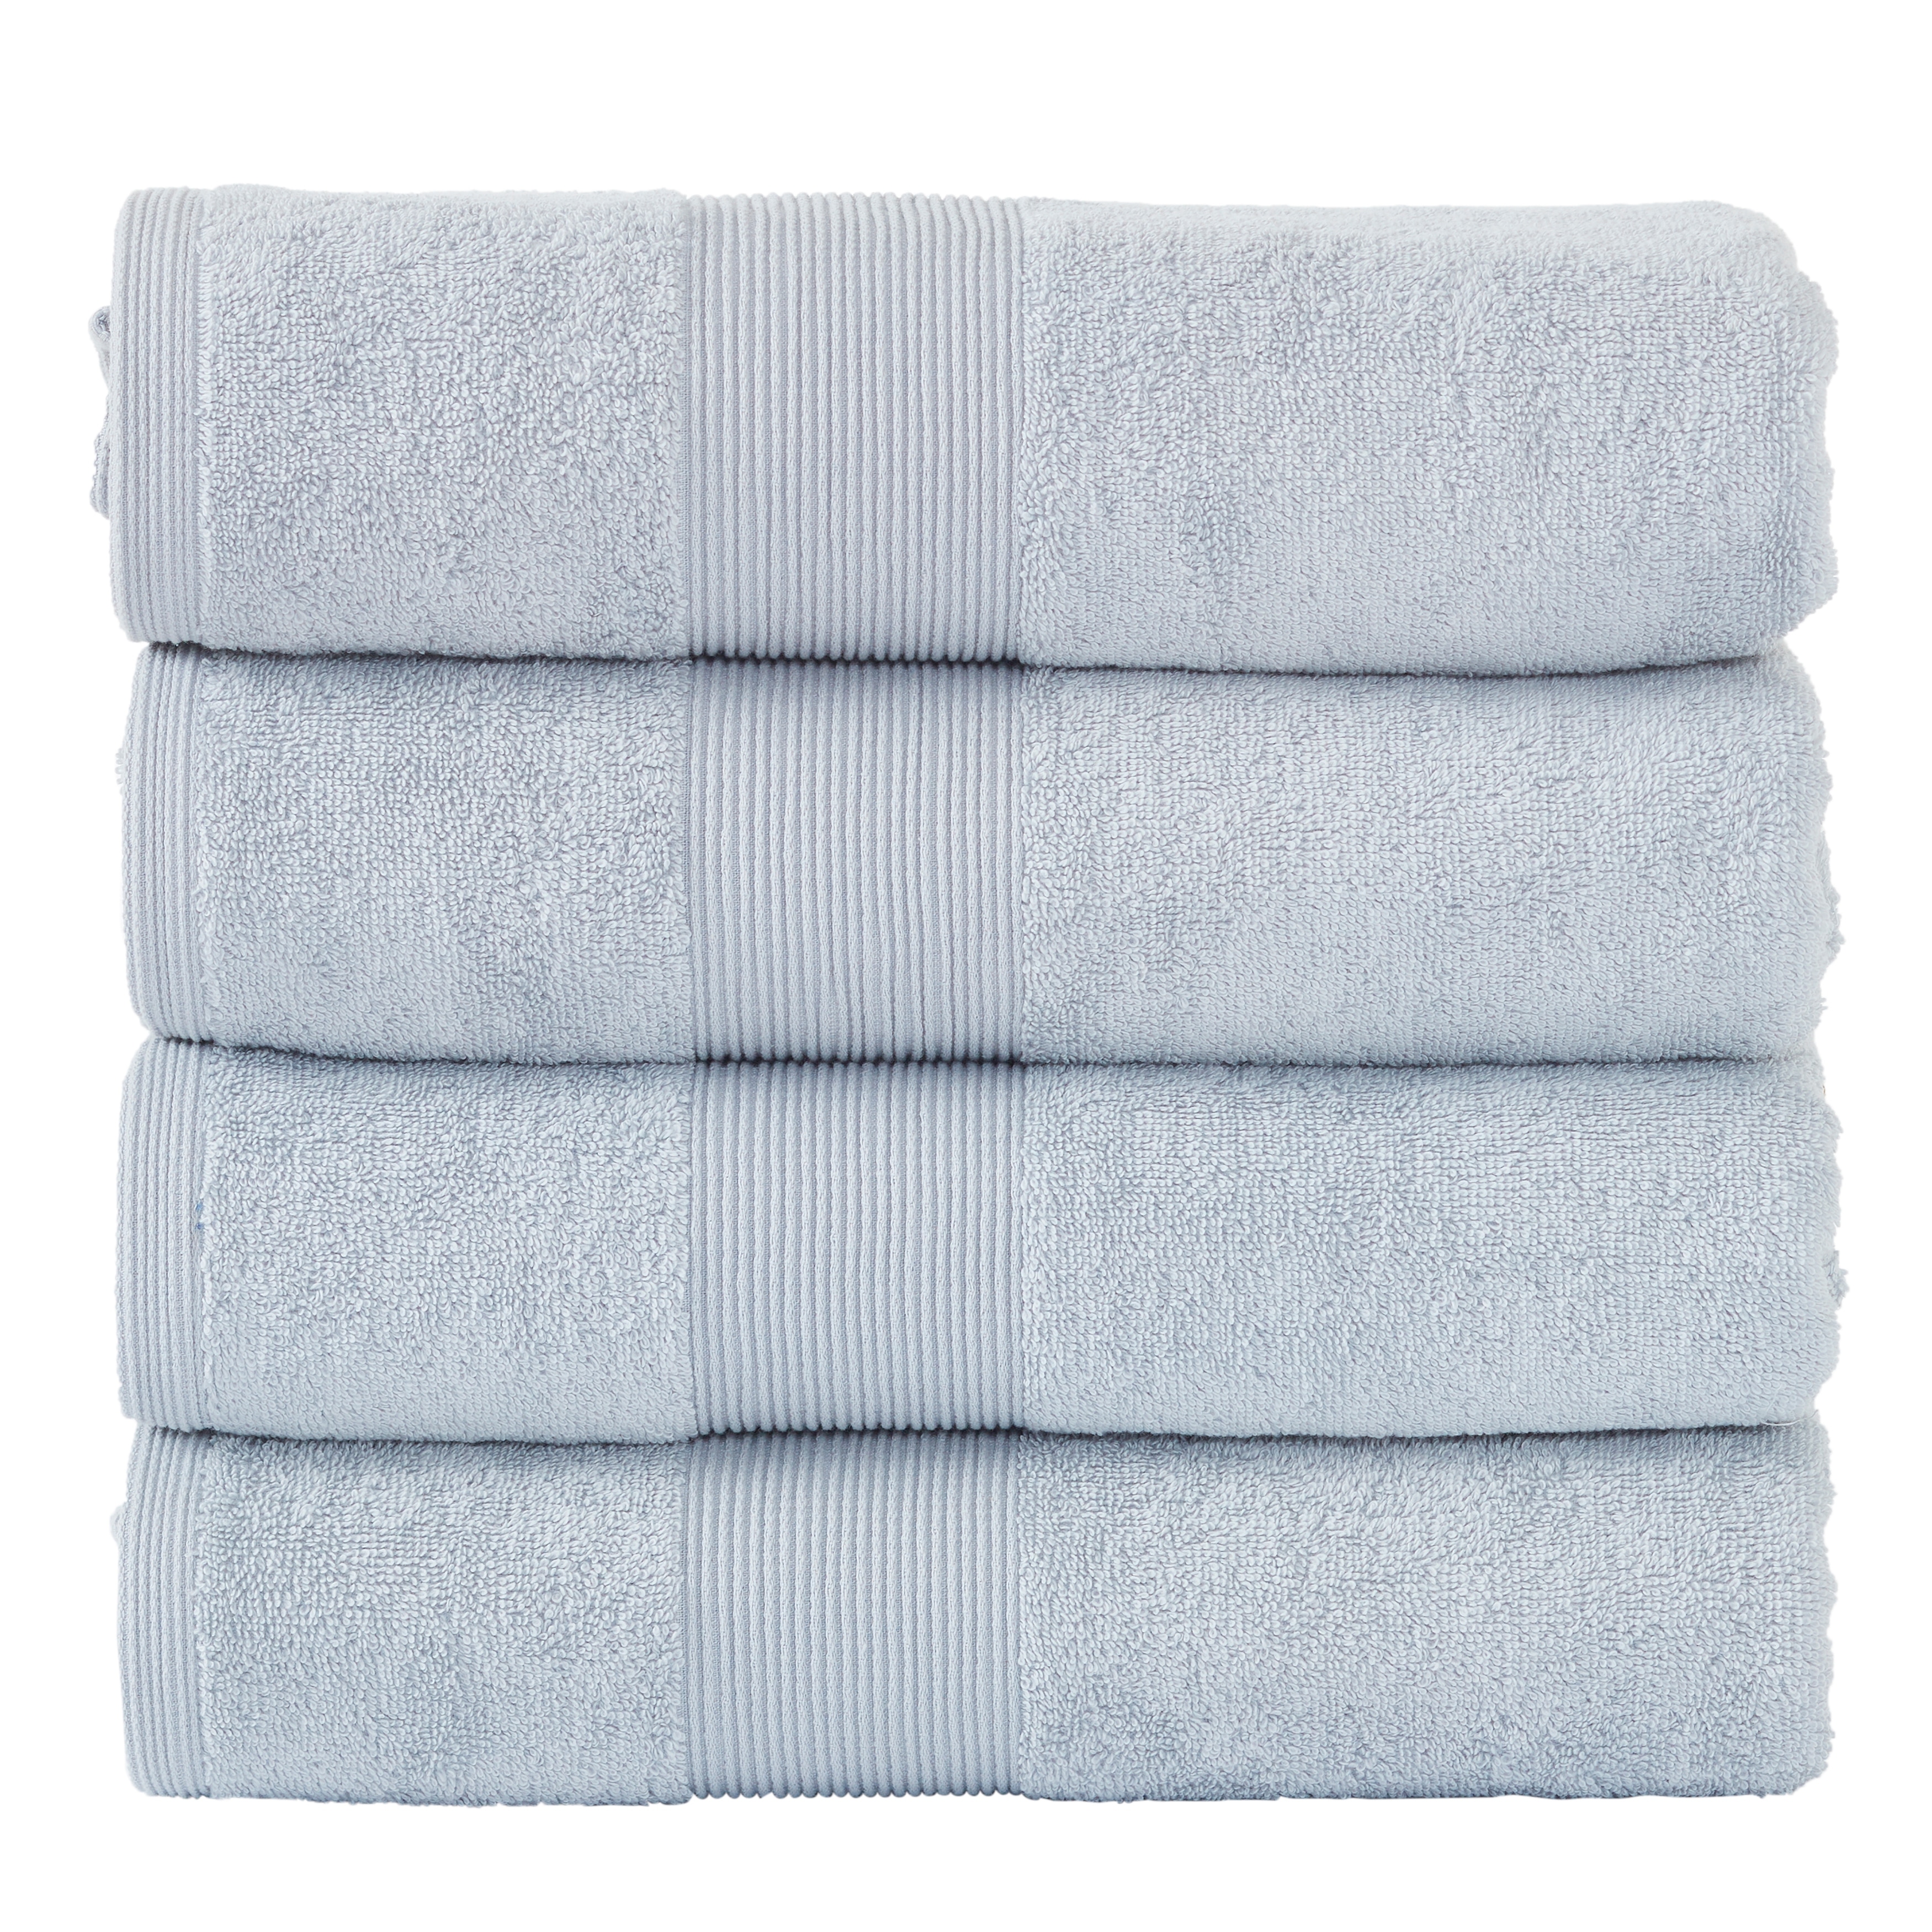 https://ak1.ostkcdn.com/images/products/is/images/direct/5184c7a460543a8f9a124249da94ae0388ca5778/Fabstyles-Super-Soft-and-Absorbent-Bath-Towel%2C-27-x-54-Inches%2C-Set-of-4.jpg